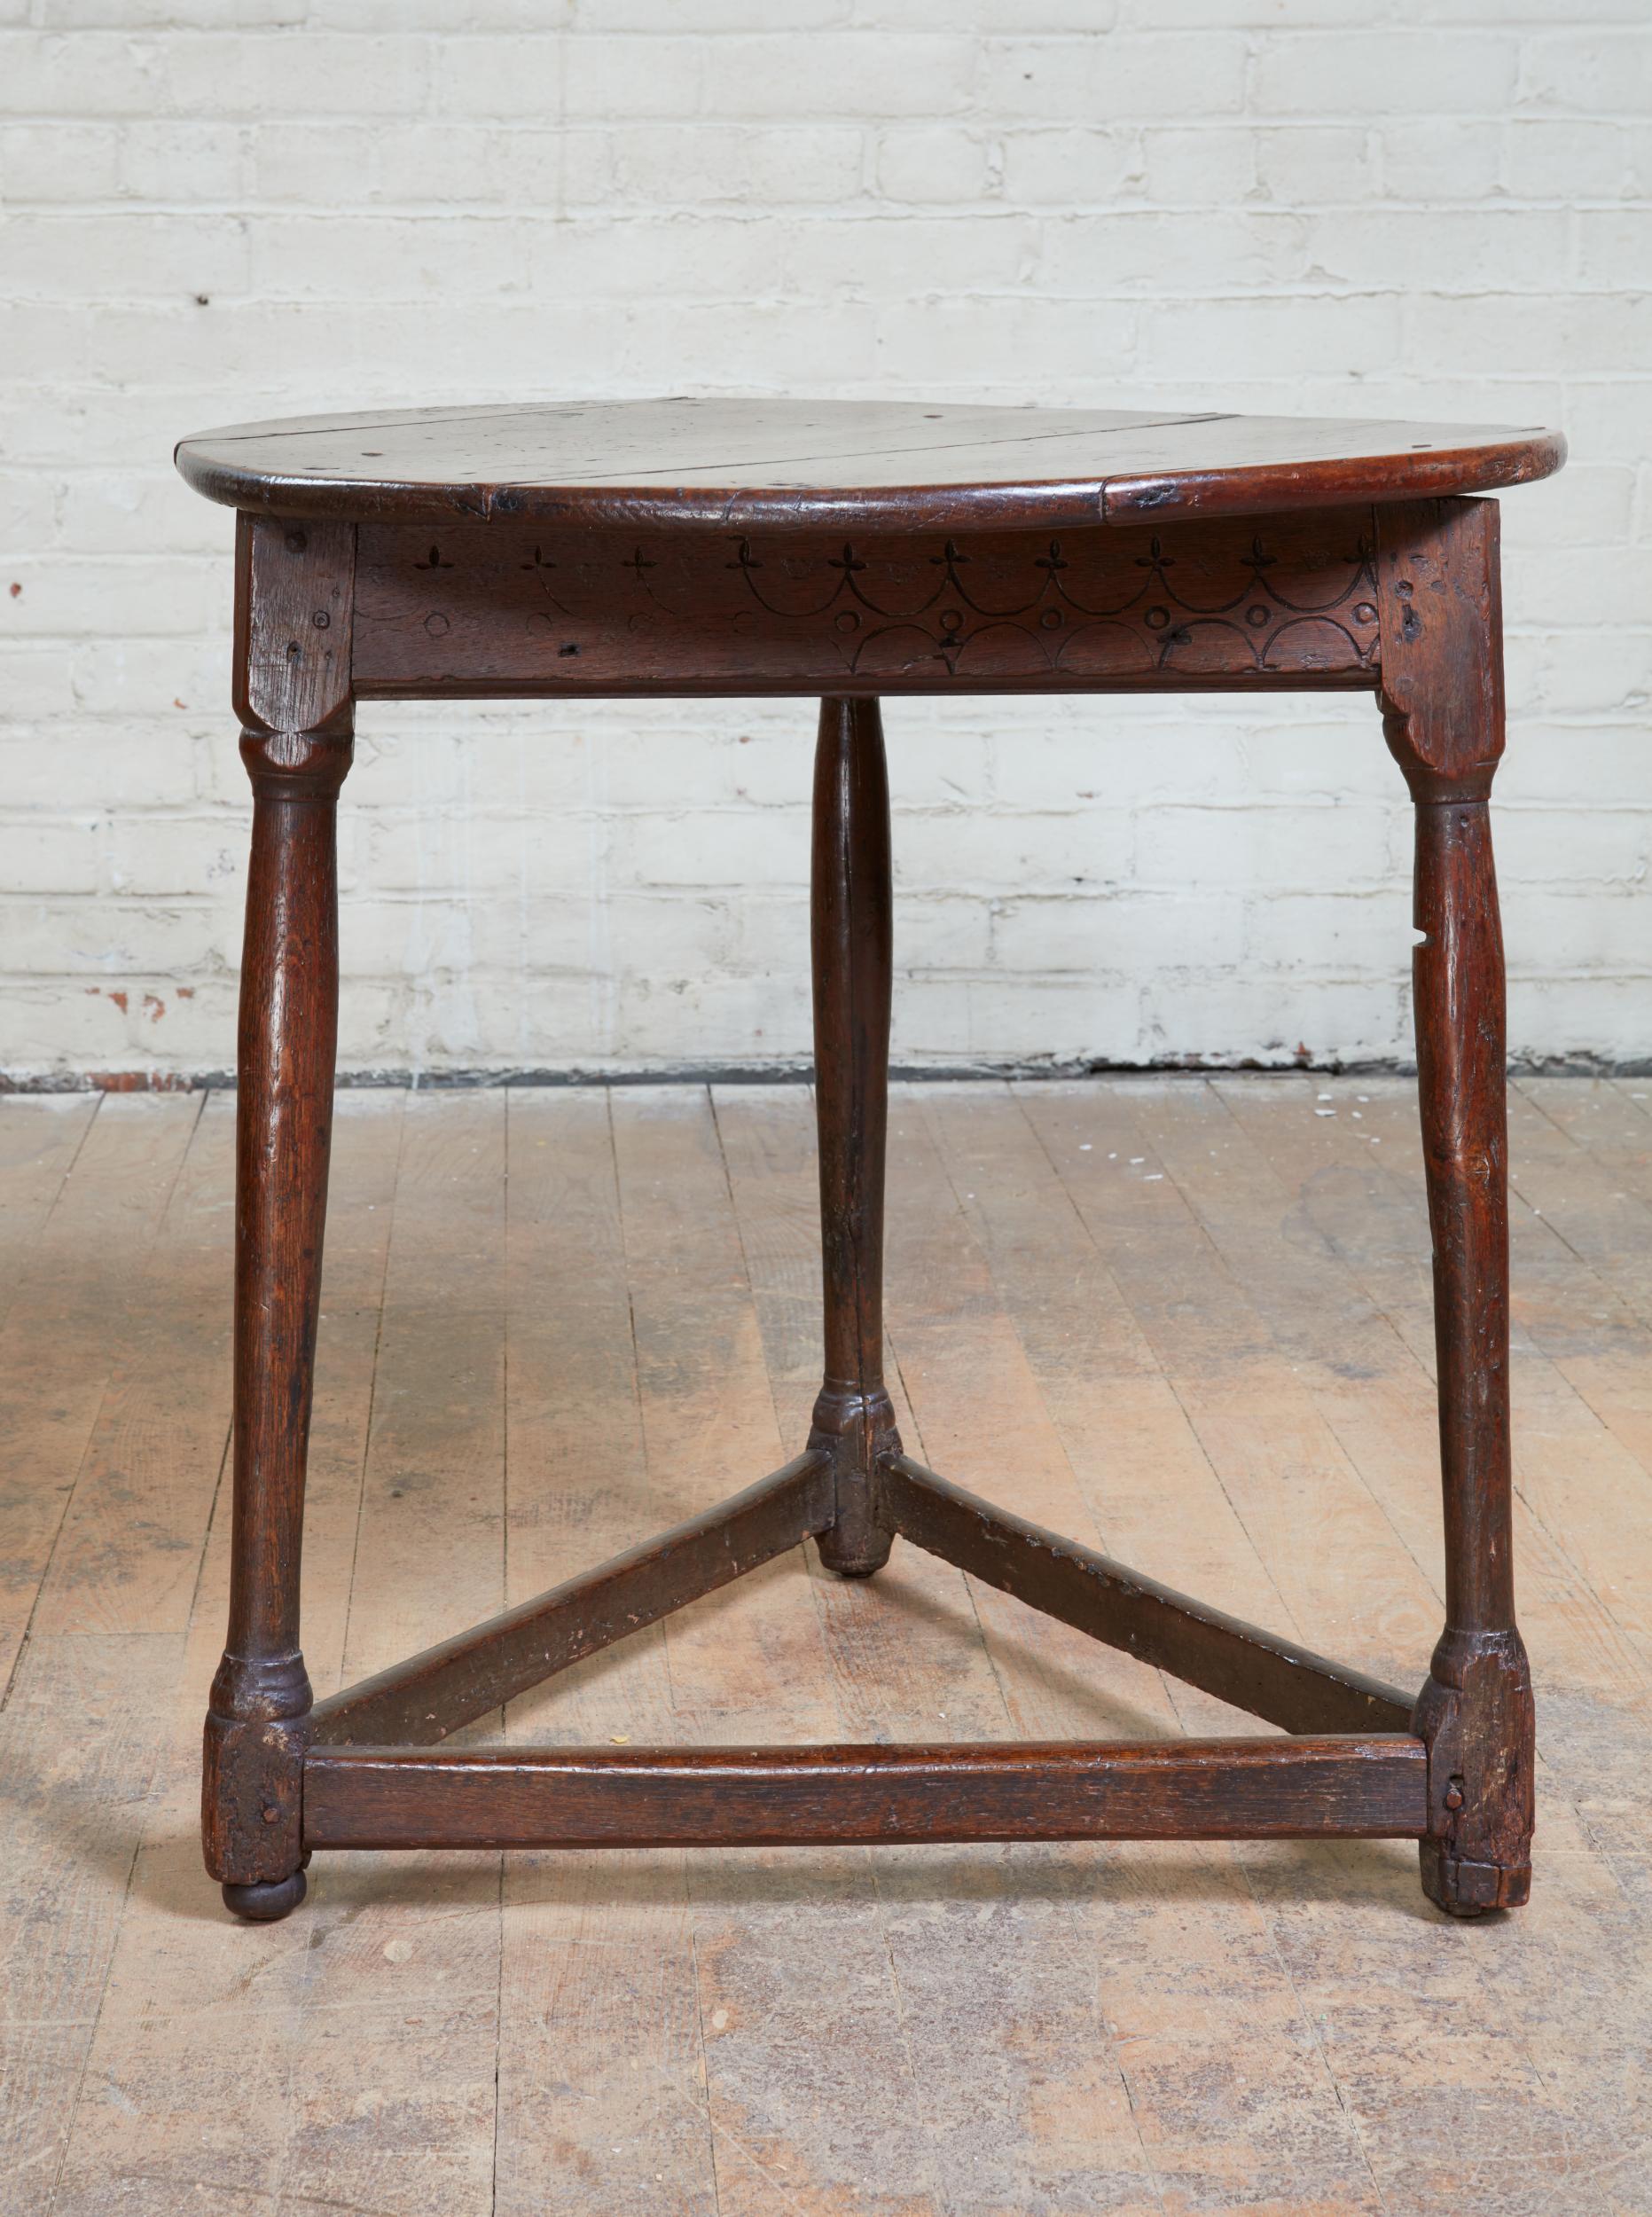 Turned 17th Century Cricket Table